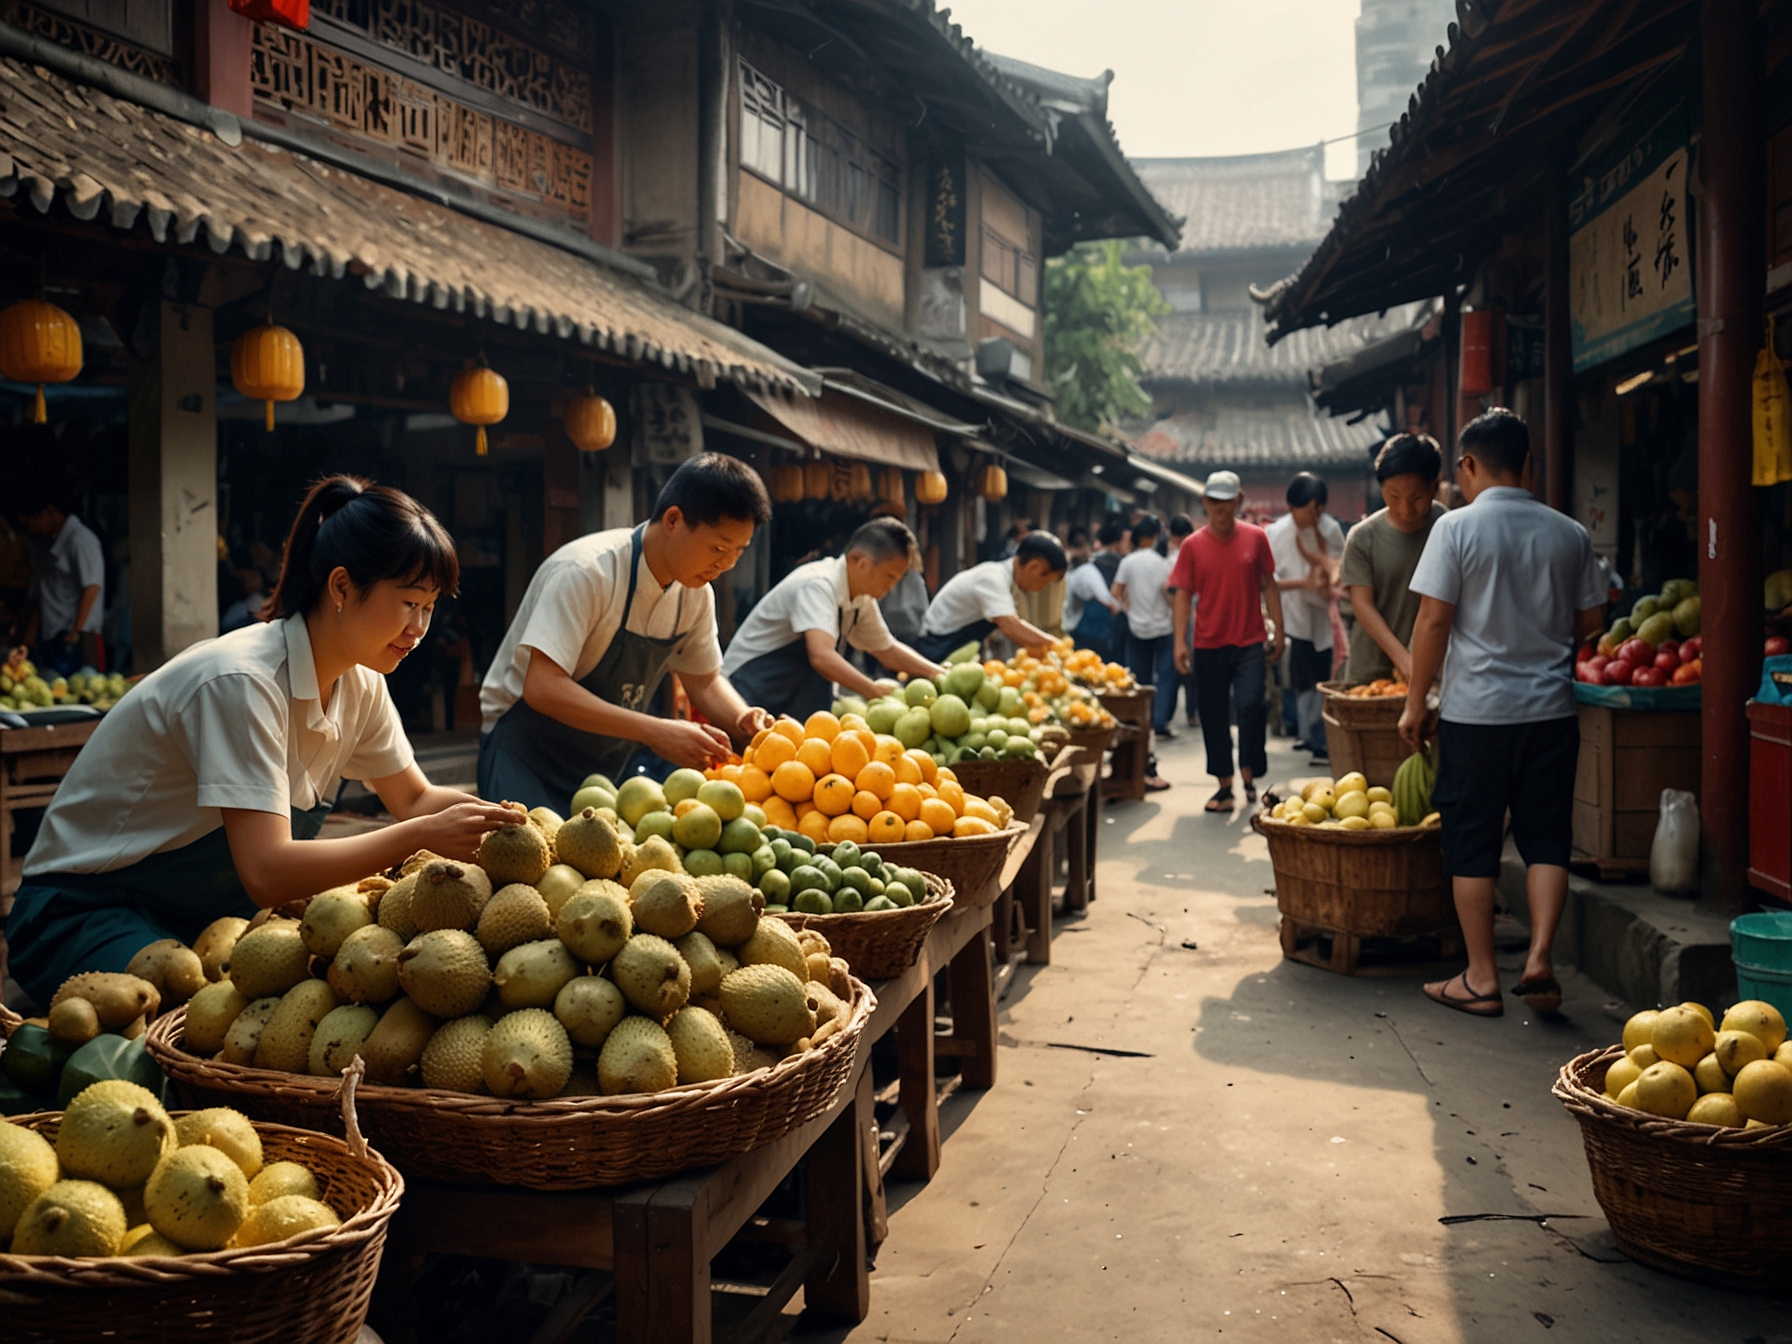 A bustling Chinese market with vendors selling durians, highlighting the fruit's spiky exterior. Shoppers, intrigued by its reputation and luxury status, browse and purchase the fruit.